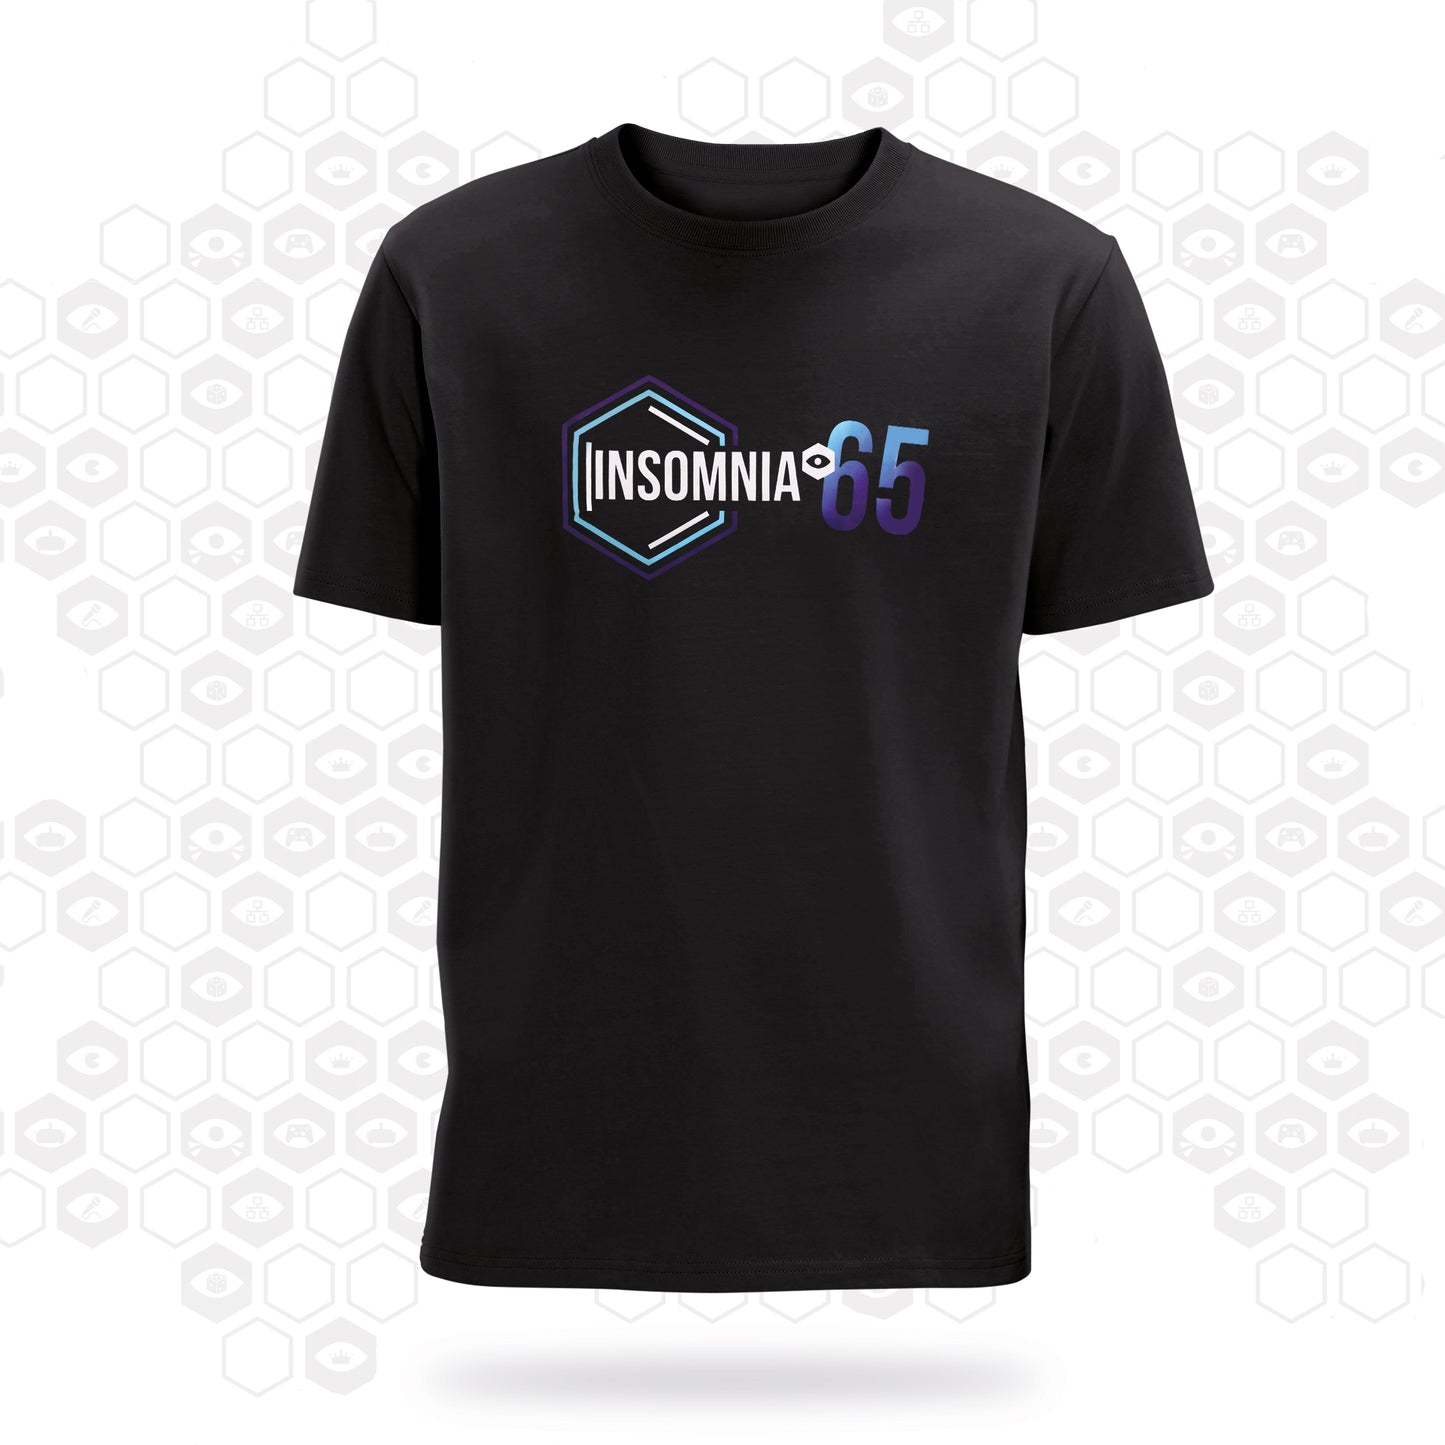 black t-shirt with insomnia logo and 65 printed on the front.